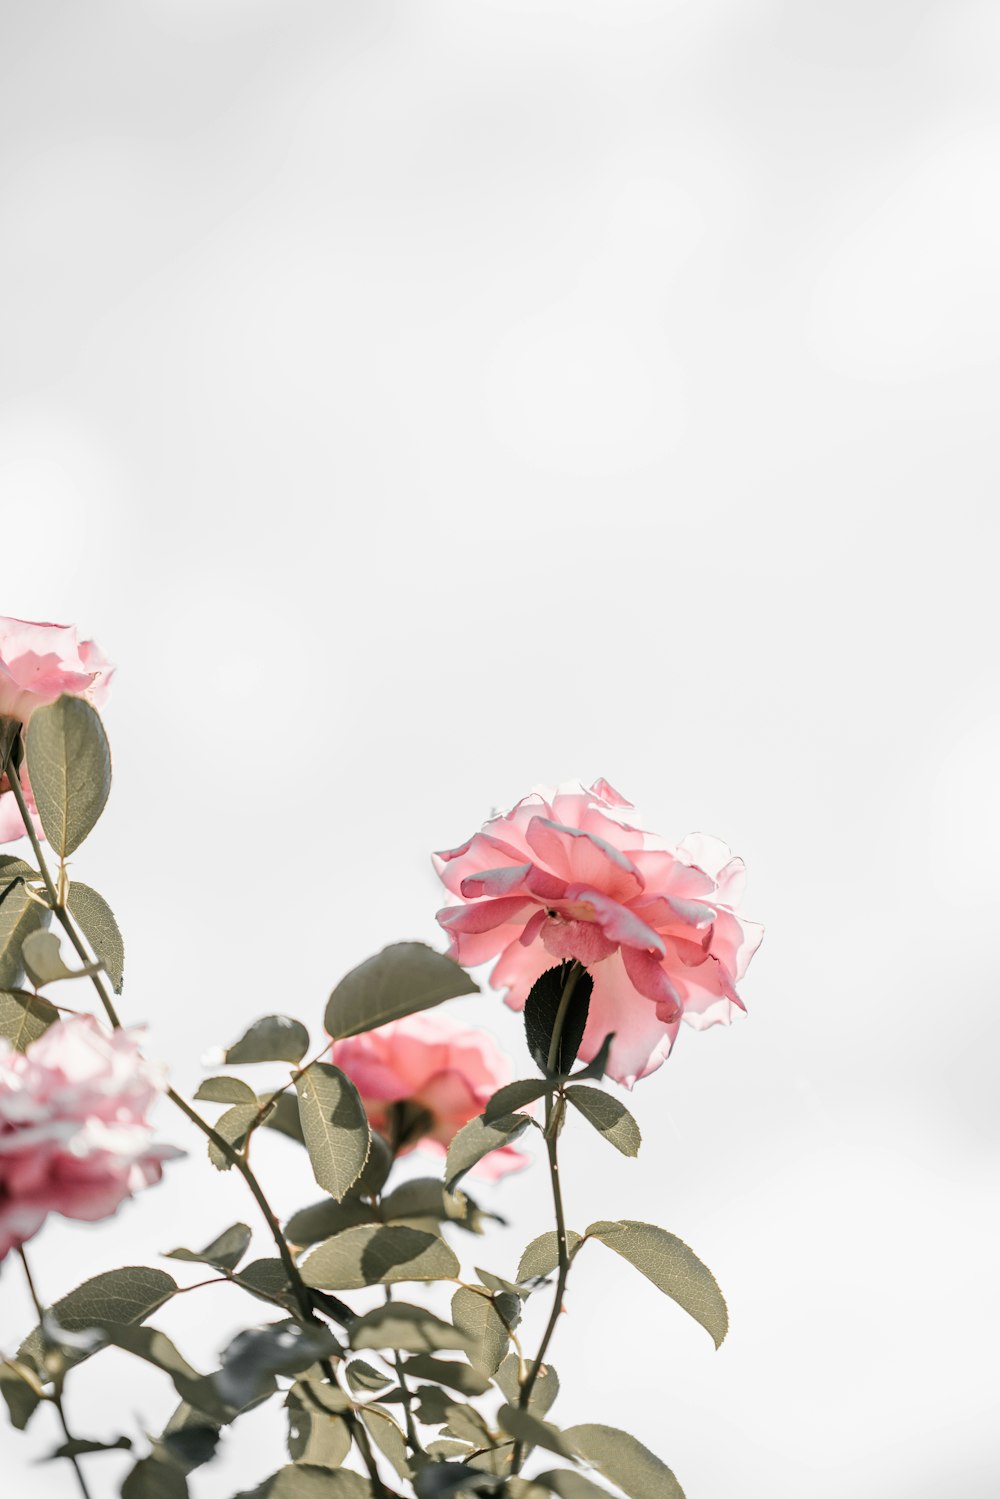 500+ Light Pink Pictures [HD] | Download Free Images on Unsplash